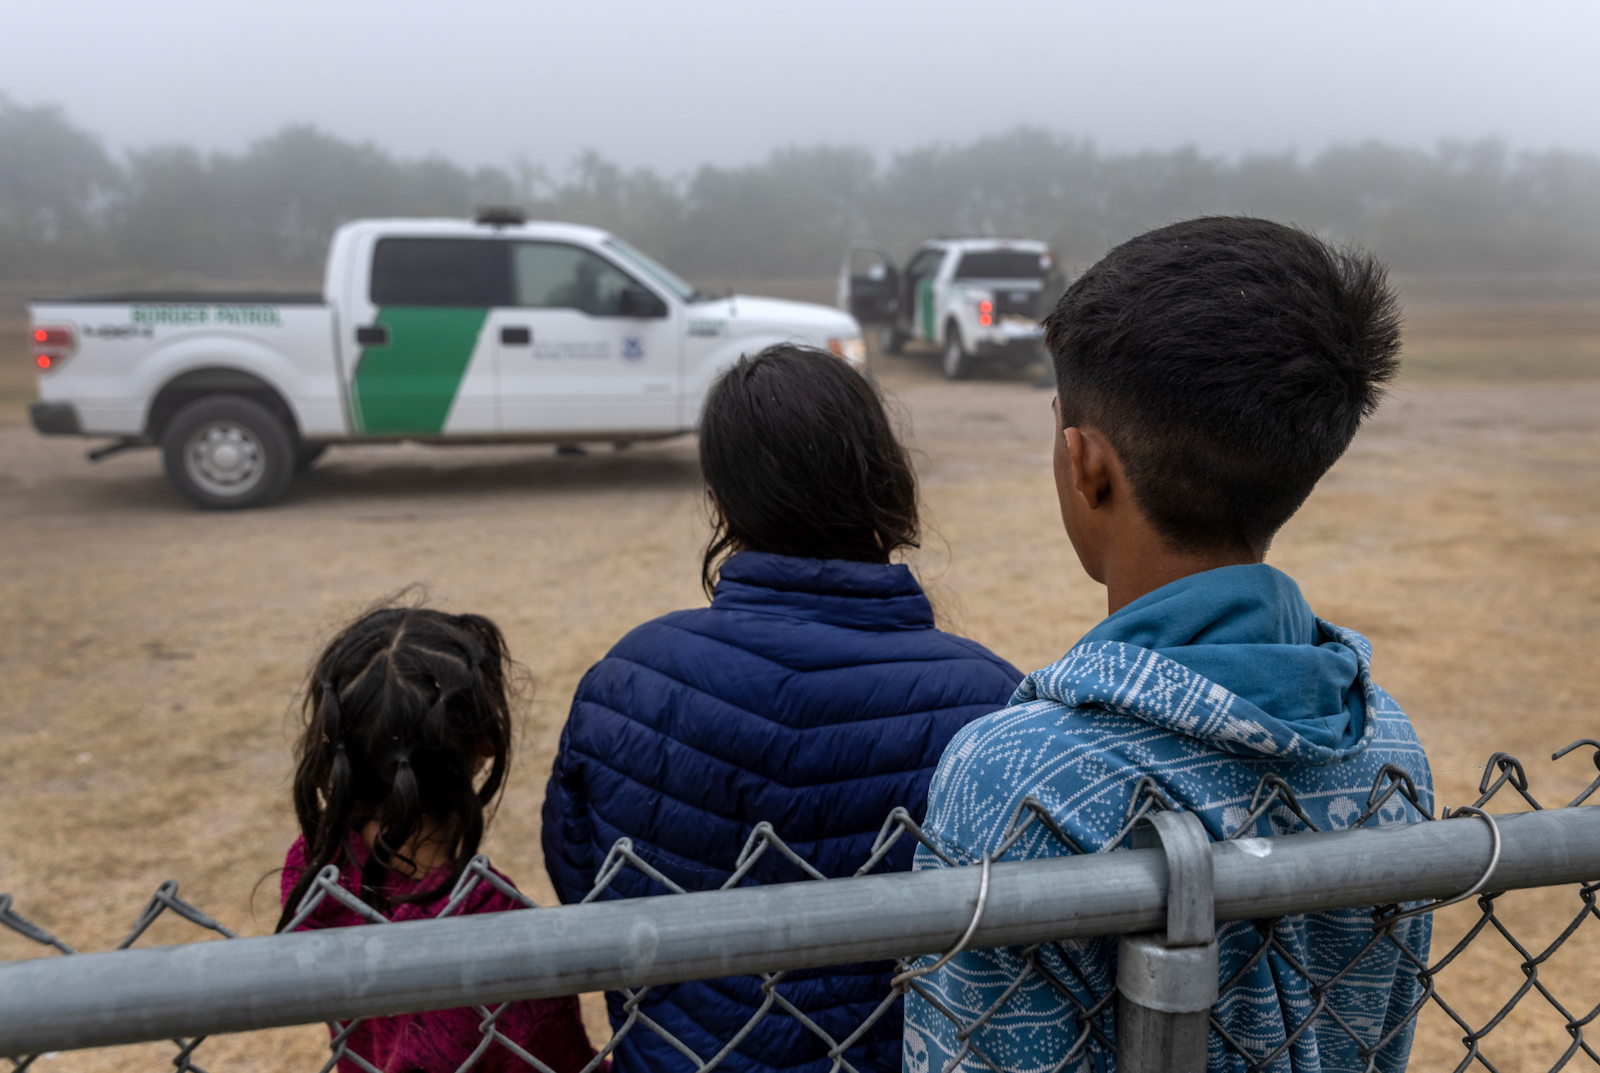 Another Immigration Purgatory for Children